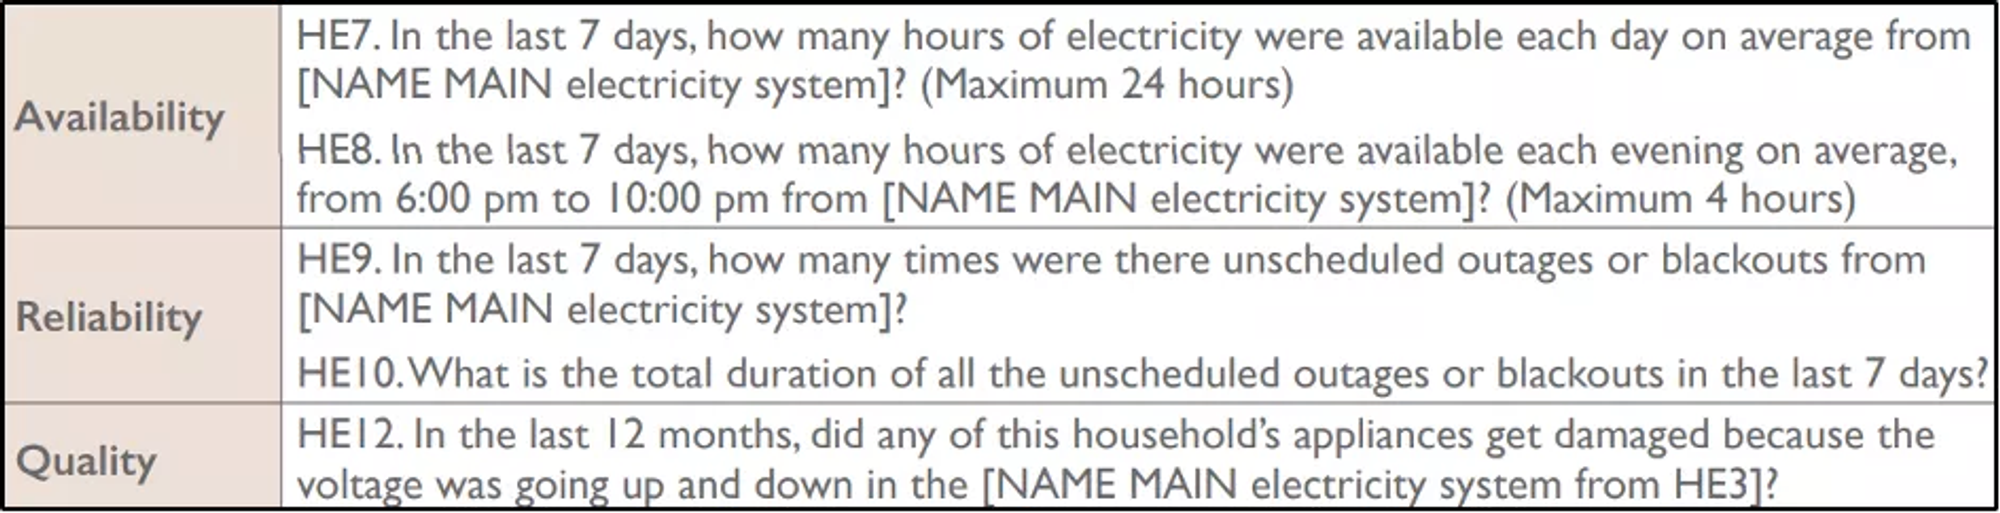 The World Bank and WHO developed and extensively piloted a set  survey questions designed to capture electricity availability, quality, and reliability at households. Surveyed individuals are expected to recall the cumulative hours and number of power outages experienced in the last week, which poses numerous challenges for data accuracy.